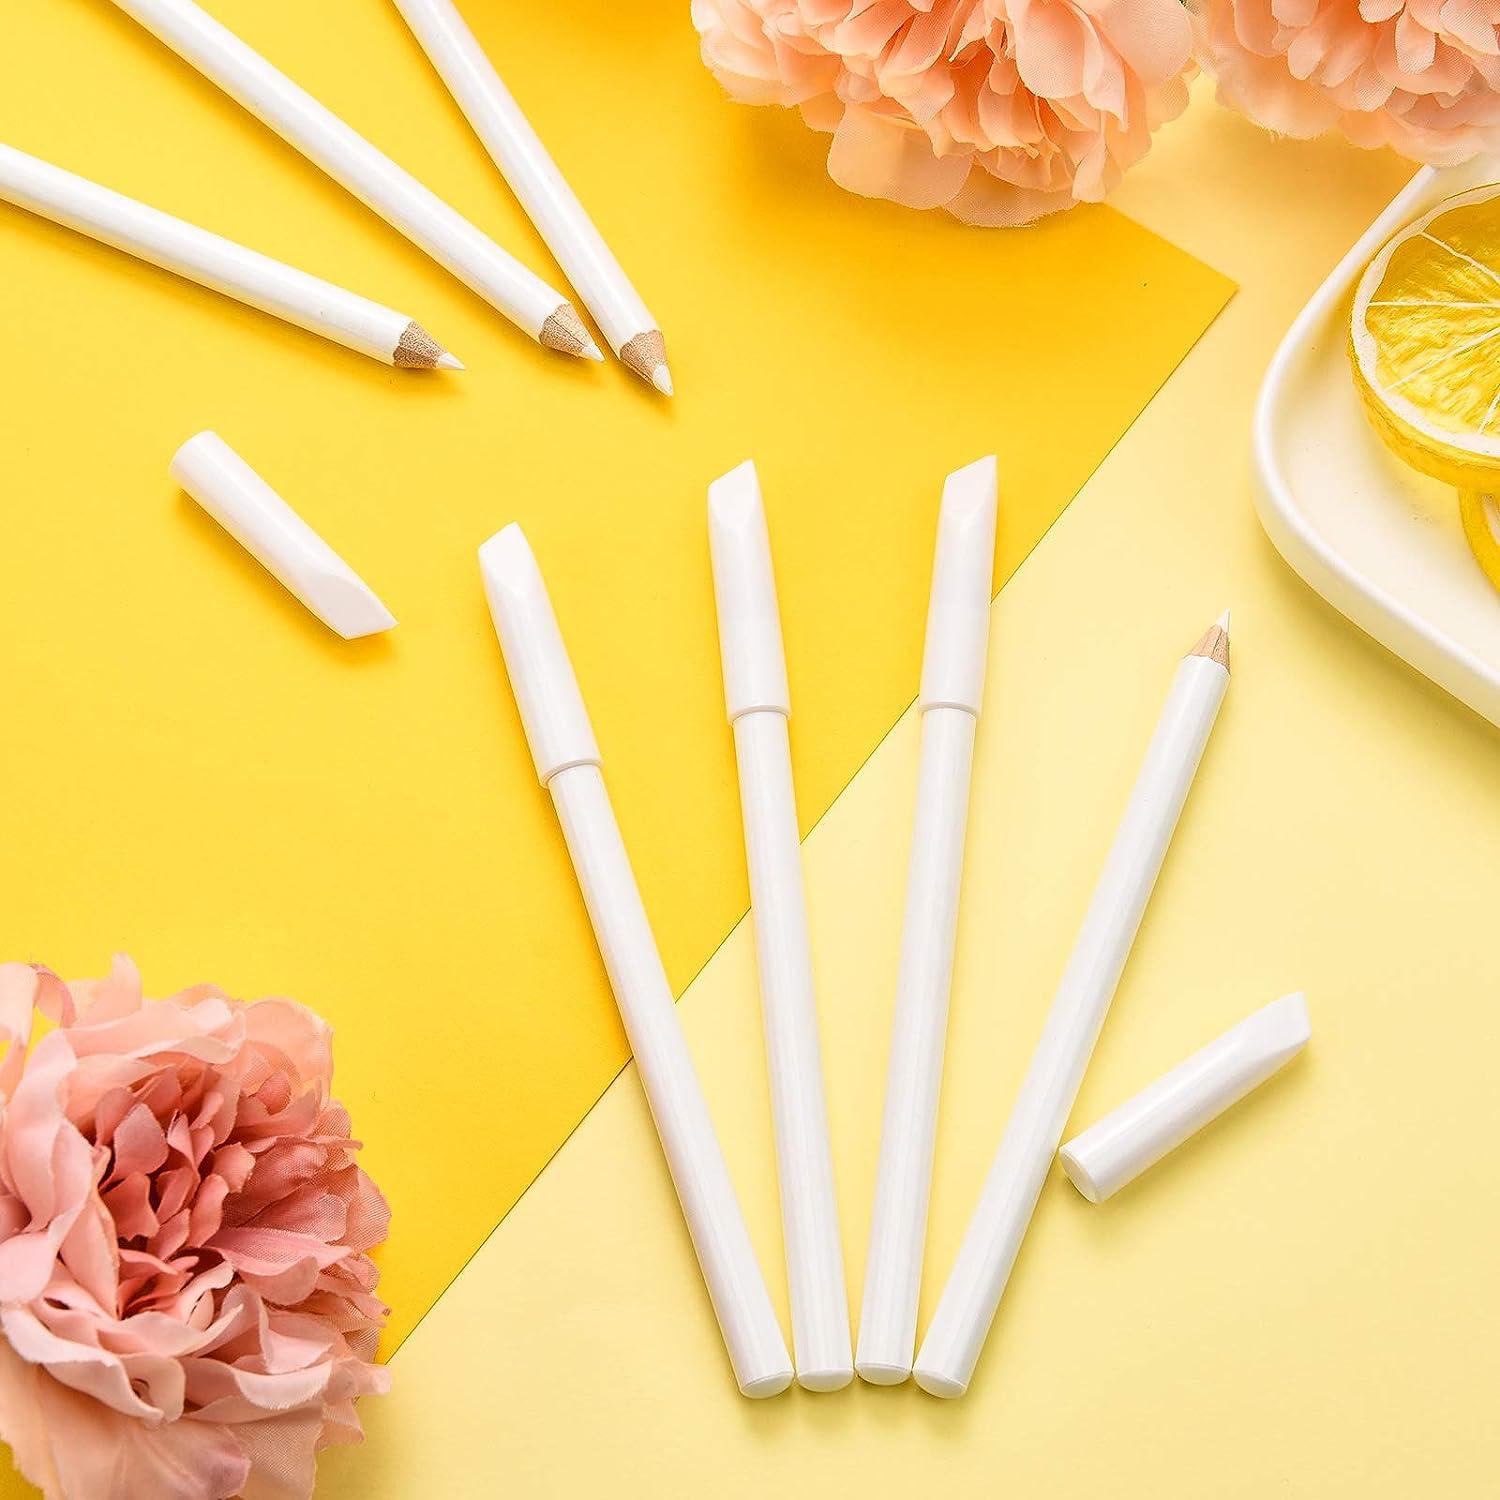 White Nail Pencil 2-in-1 Nail Whitening Pencils French Nail Art Pencils  with Cuticle Pusher for DIY Nail Art Manicure Supplies (3 Pieces) by Blulu  - Shop Online for Beauty in Thailand